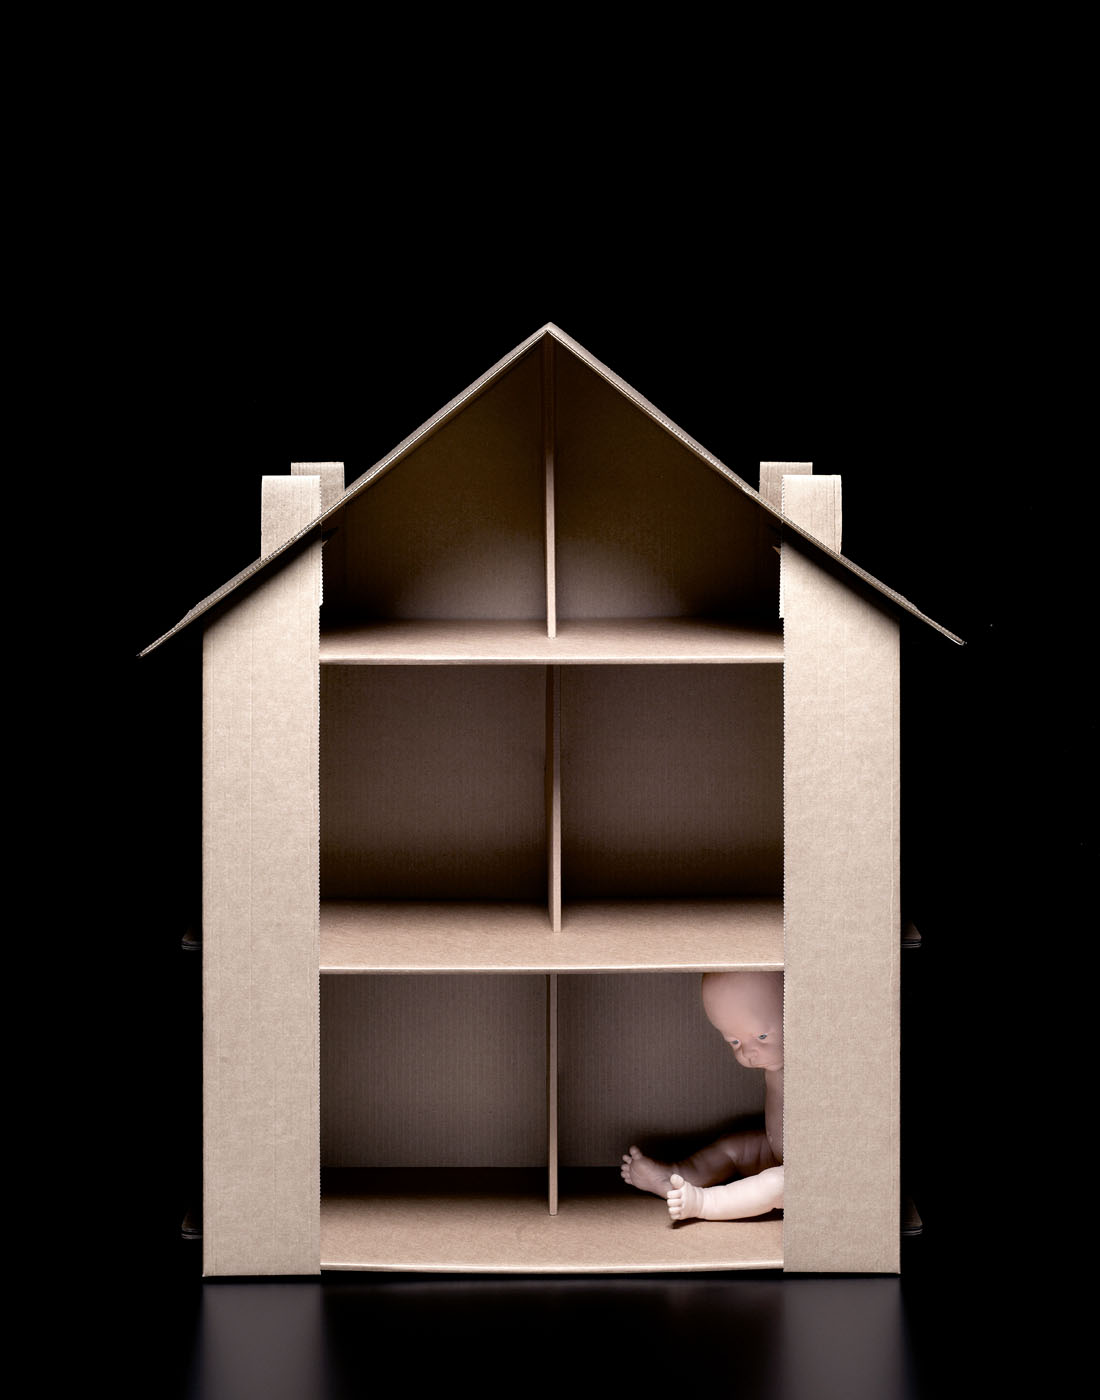 Sad baby doll in recycled paper house by Alexander Kent London based still life and product photographer.